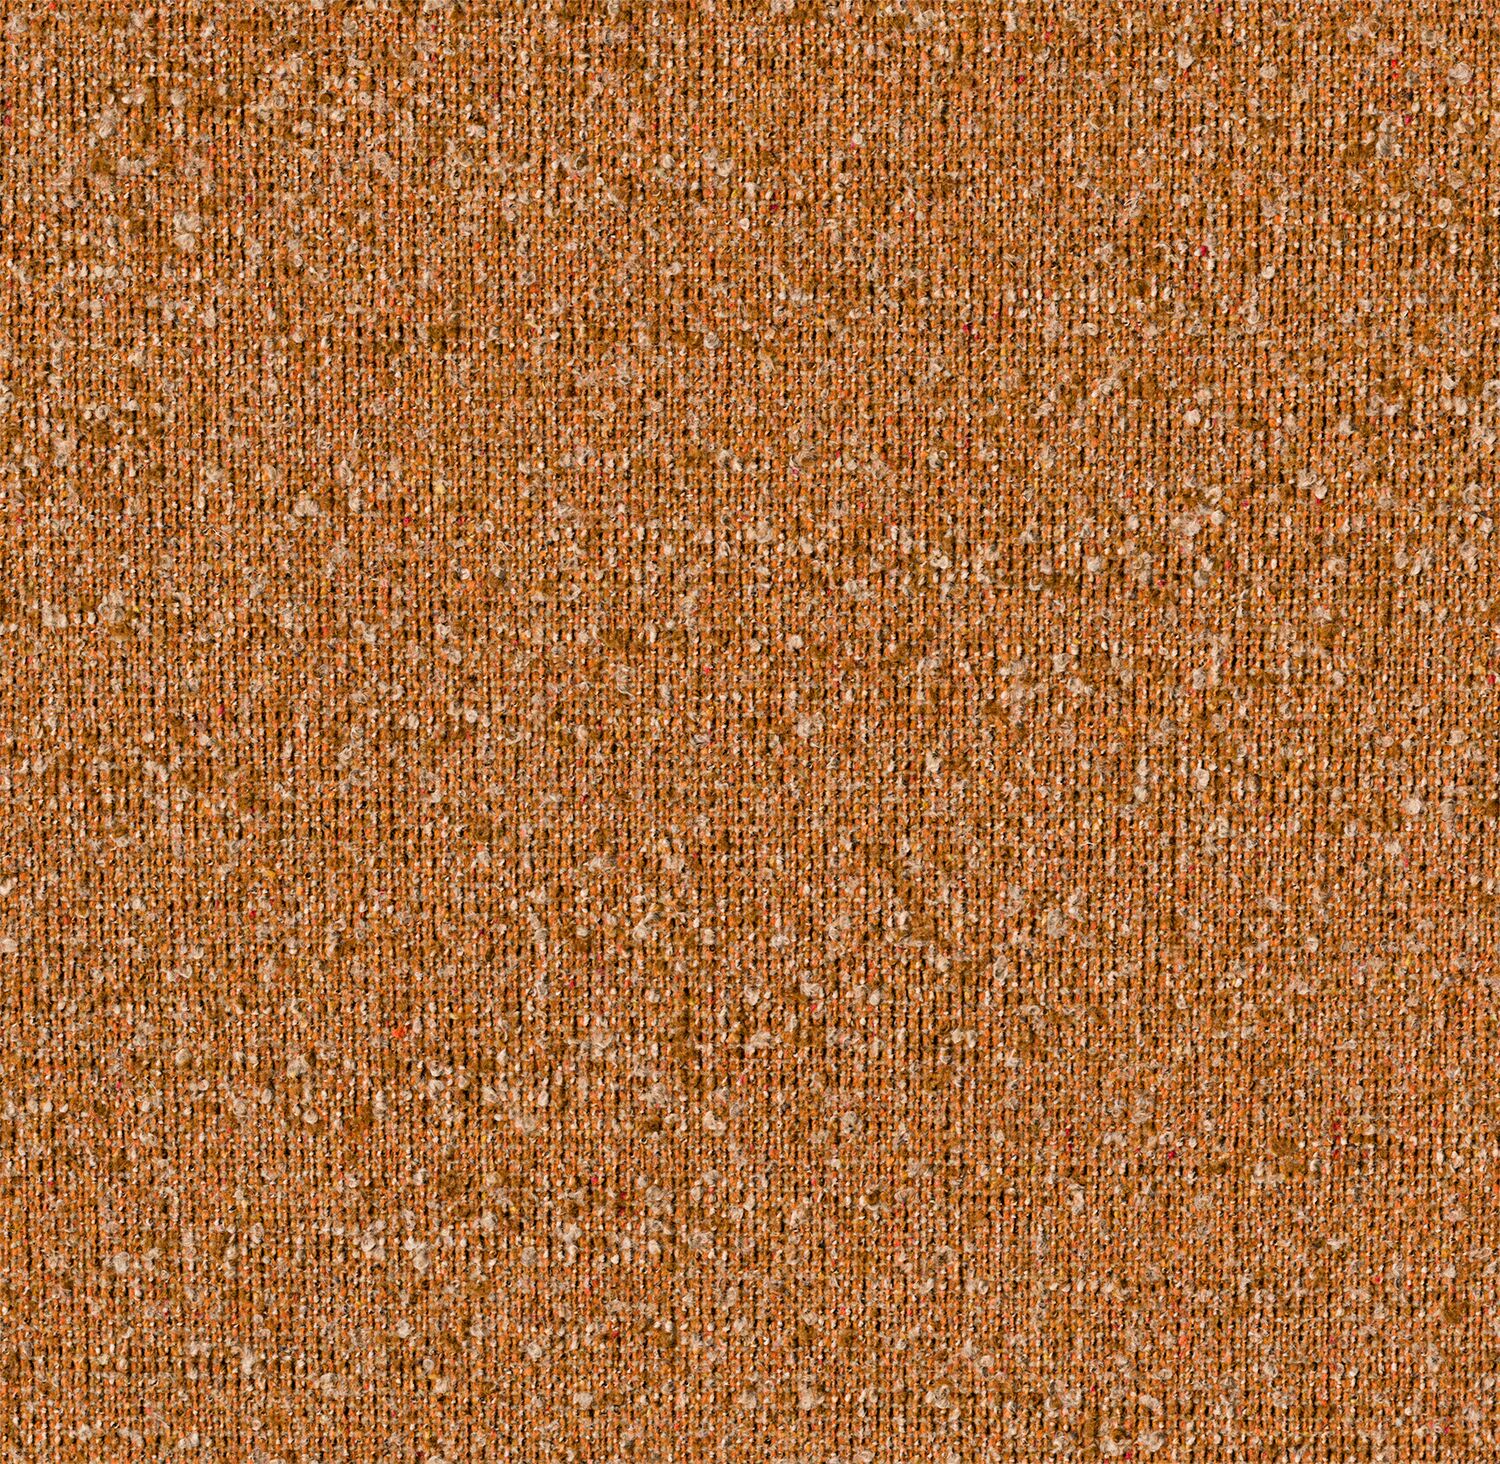 Everyday Boucle - Spicebush - 4111 - 19 - Half Yard Tileable Swatches